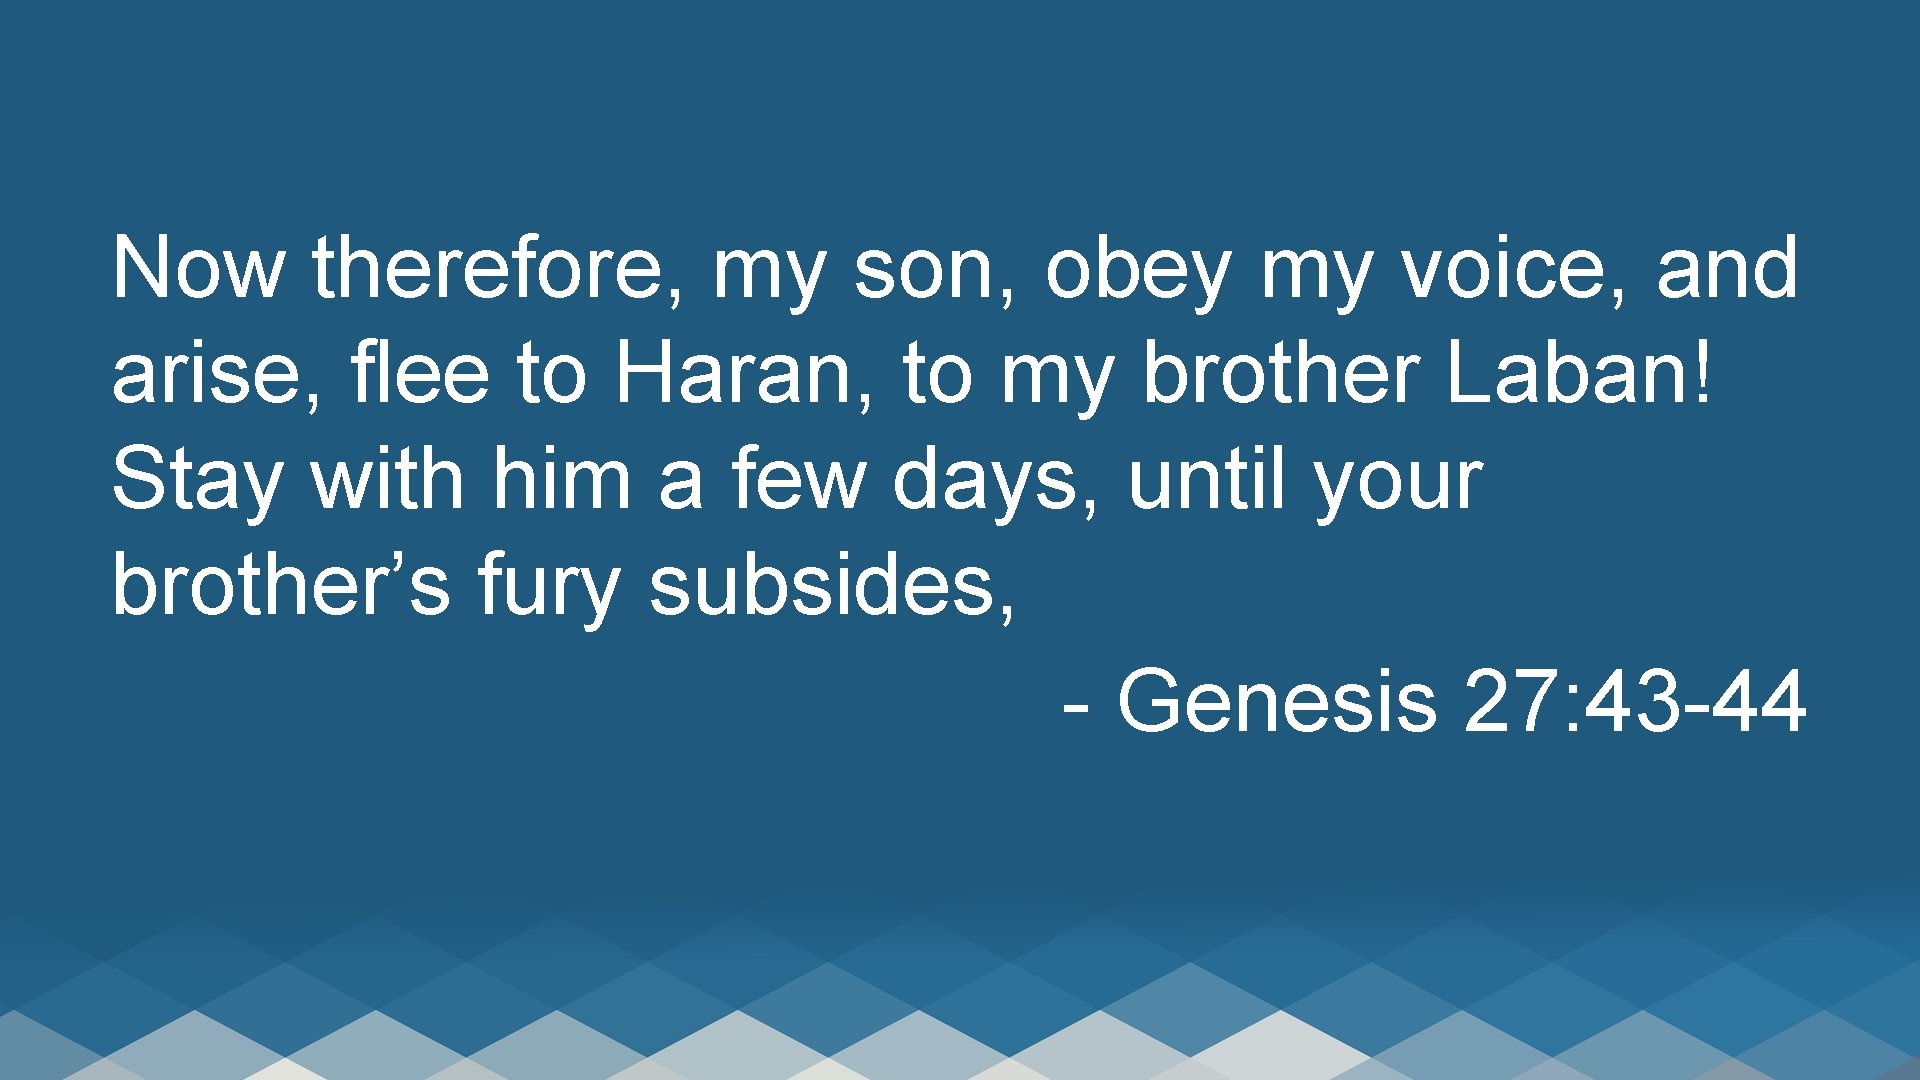 Now therefore, my son, obey my voice, and arise, flee to Haran, to my